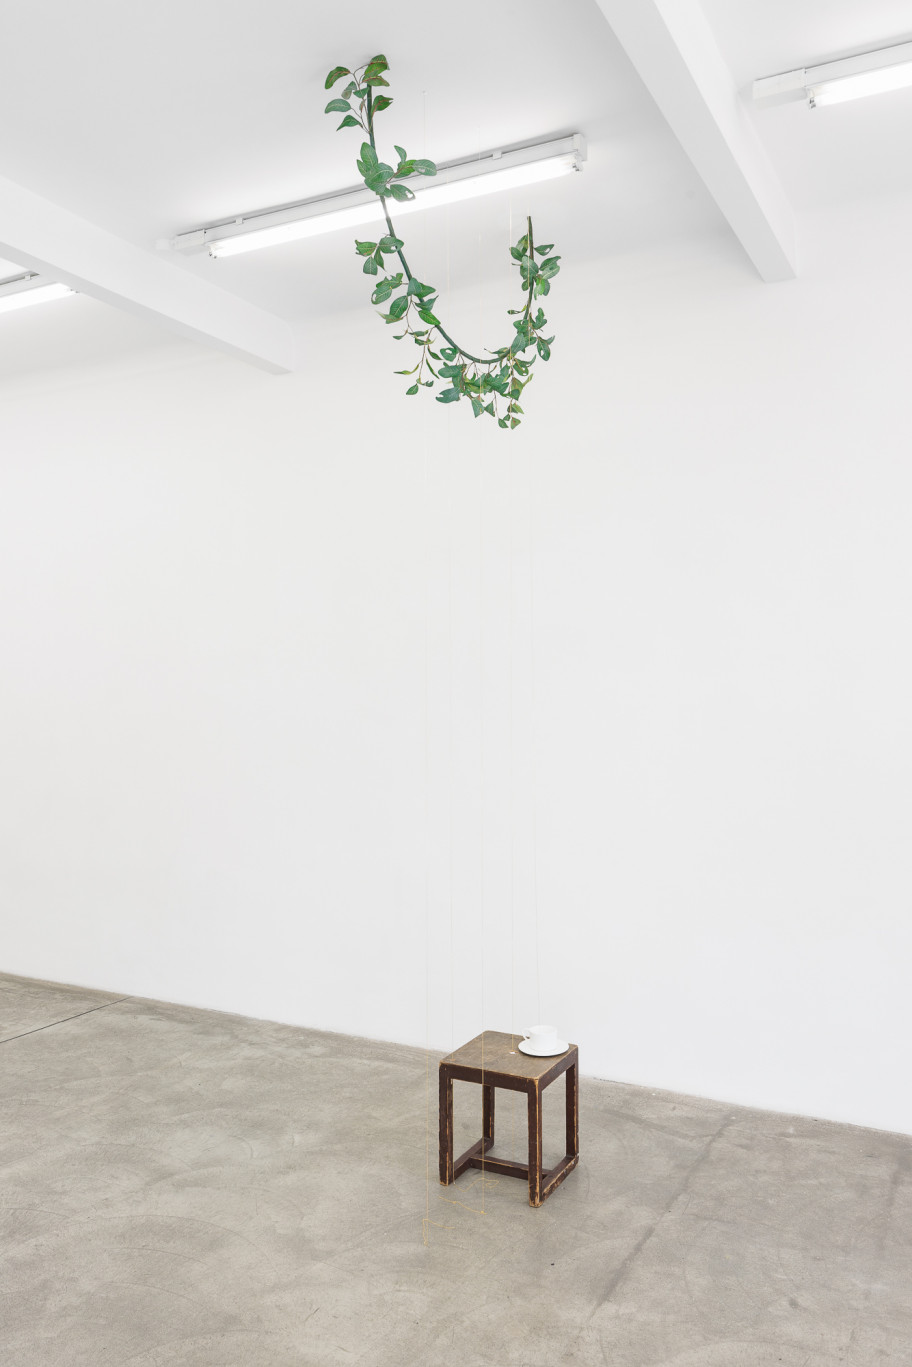 Tania Pérez Córdova A drip in a room in a house , 2023 iron, epoxy clay, plastic, acrylic, patterns of leaf damage, gold plated brass chains, found wooden stool, cup overall dimensions vary with the installation 